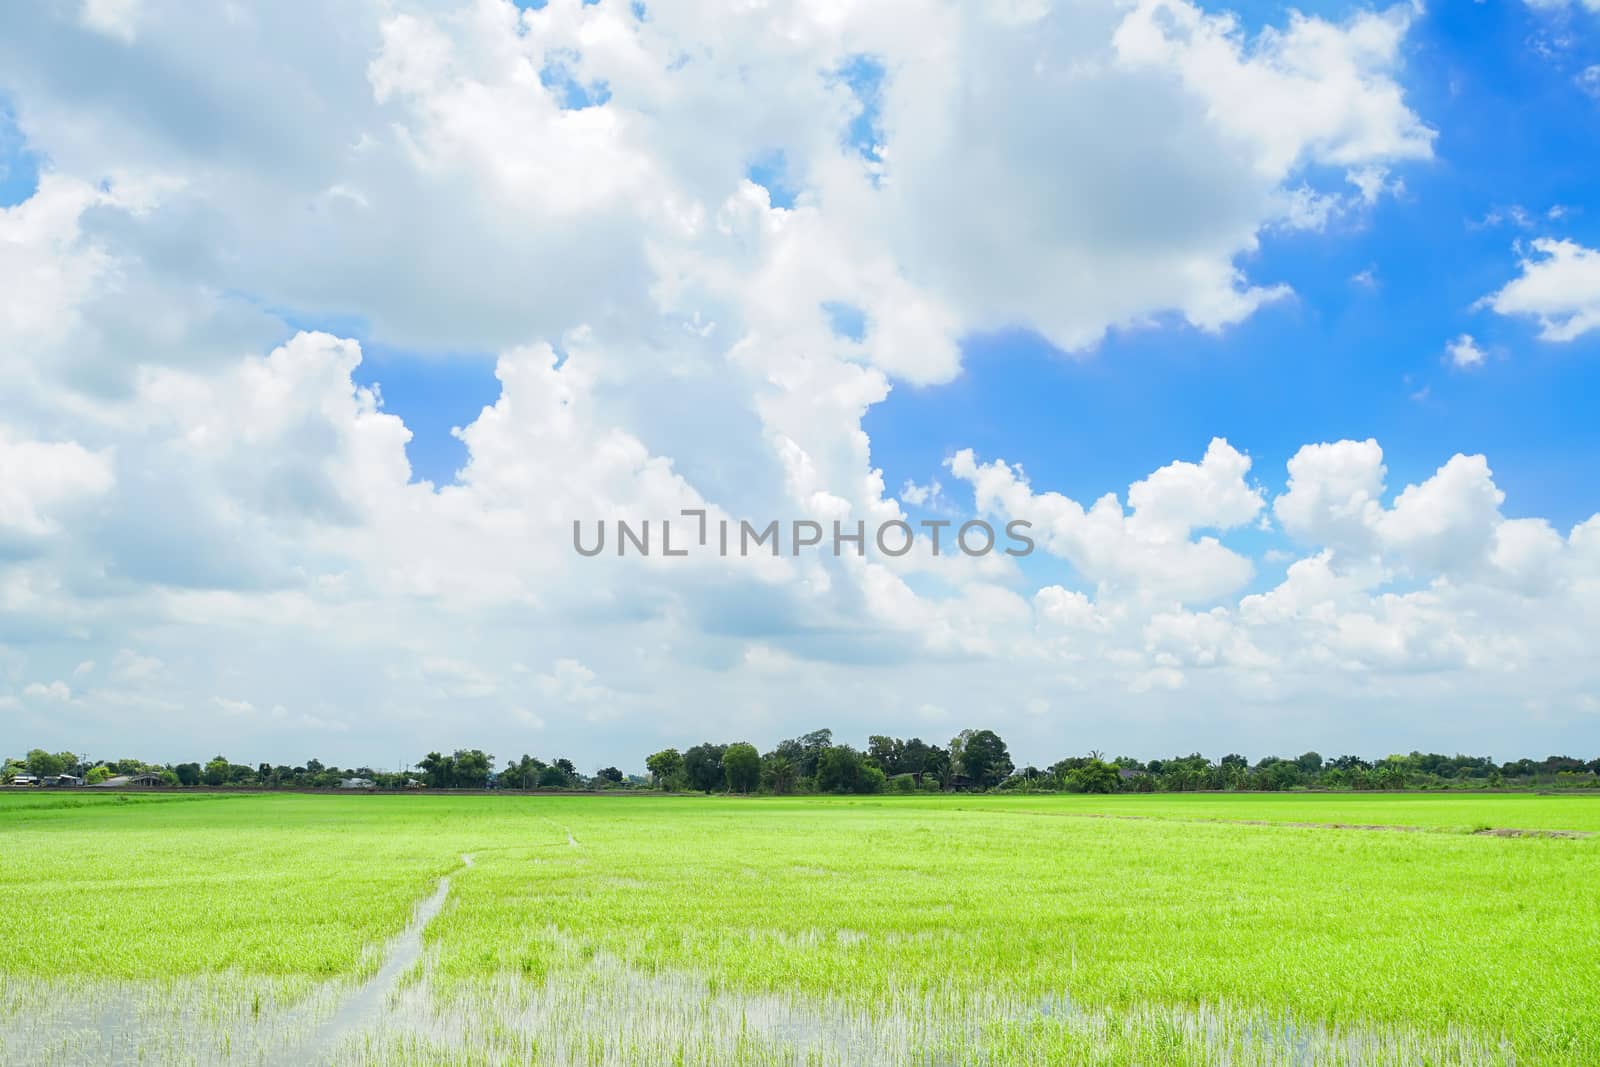 Thai rice field with cloudy sky background in Bang Nam Priao district, Chachoengsao province, Thailand.